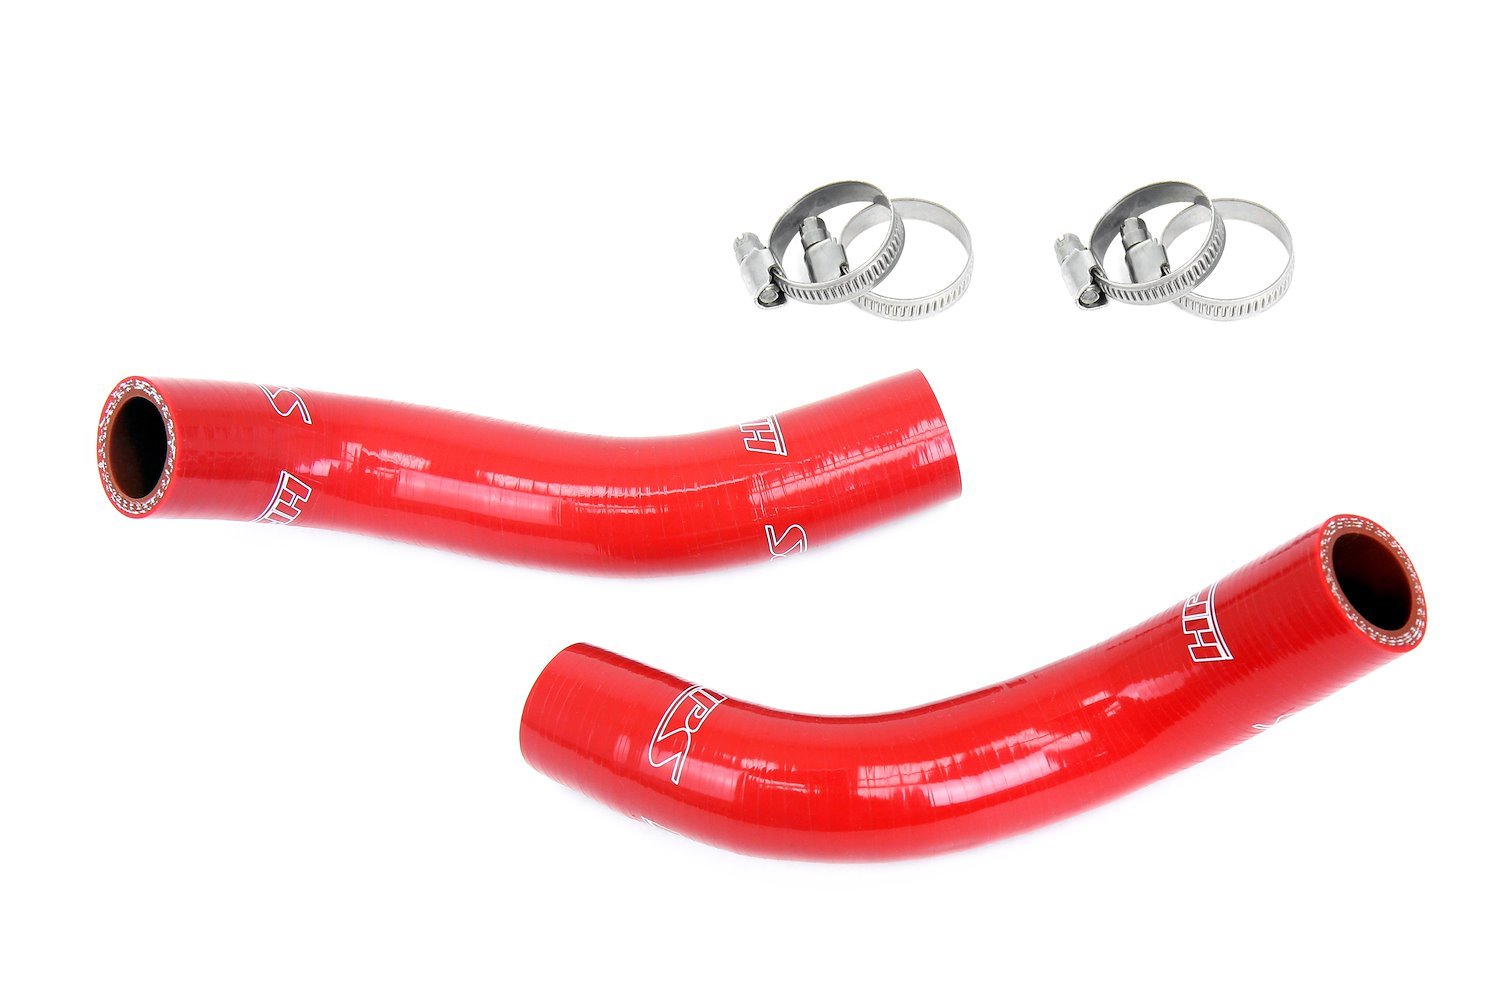 57-2045-RED Breather Hose Kit, 3-Ply Reinforced Silicone, Replaces Rubber Breather Blow Off Valve Hoses